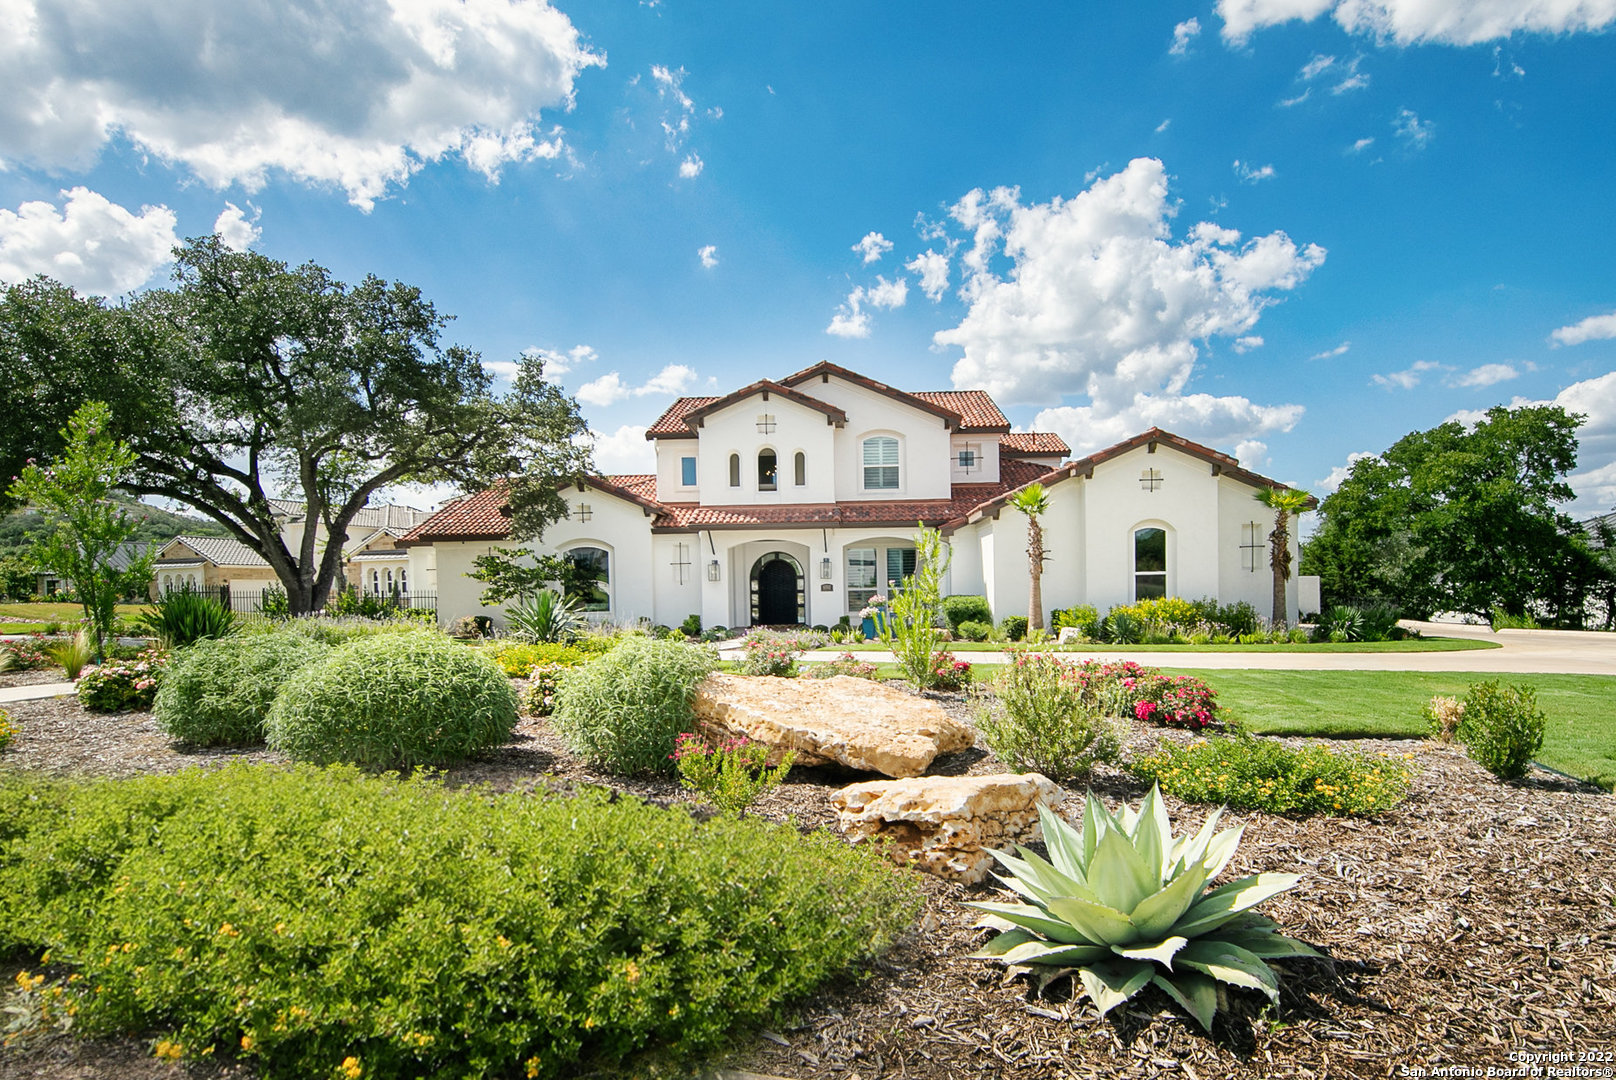 This stunning McNair Custom Home is located in the privately gated community of Cantera Hills. This architectural masterpiece boasts elements of both Spanish and contemporary intertwined with a Texas Hill Country flare. Upon entry you will notice a gorgeous view of your outdoor oasis along with an elegantly curved staircase and plenty of natural light. The luxurious finishes and attention to detail is stated in every room with wood flooring throughout, high ceilings, open-concept living and sliding glass doors providing that perfect indoor-outdoor flow. Four bedrooms, four full and two half baths, study, dining room with a wet bar and wine cellar, chefs kitchen with custom cabinets and stainless steel high-end appliances, master suite with walk-through shower and private patio overlooking the Texas Hill Country. There is plenty of space for entertaining with a secondary game room on the main level along with a flex space on the secondary level. Enjoy your custom built Keith Zars inground pool and spa along with a beautiful covered patio and outdoor kitchen. McNair Custom Homes are well-known for their energy efficiency built homes and quality. Schedule your today!